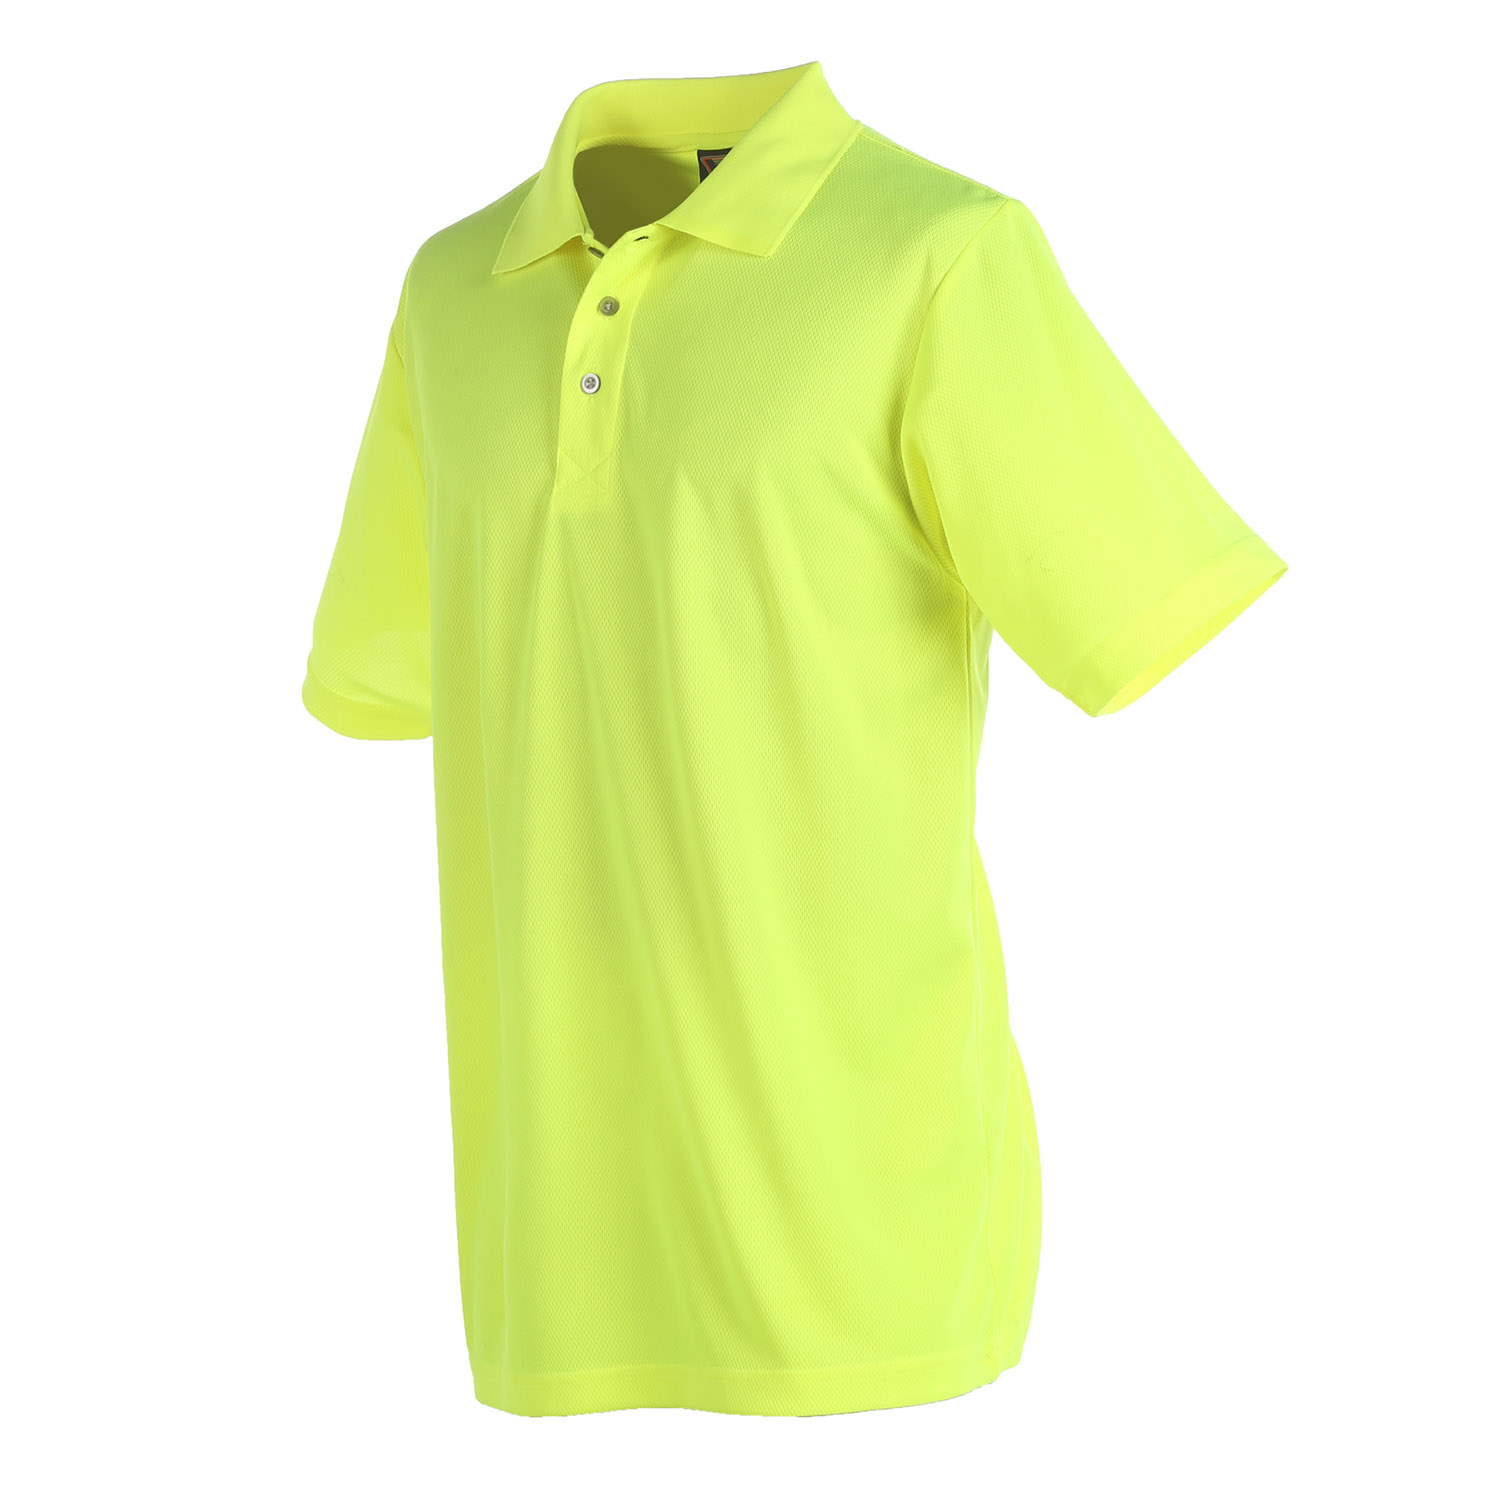 Reflective Apparel Factory Visibility Knit Performance Polo